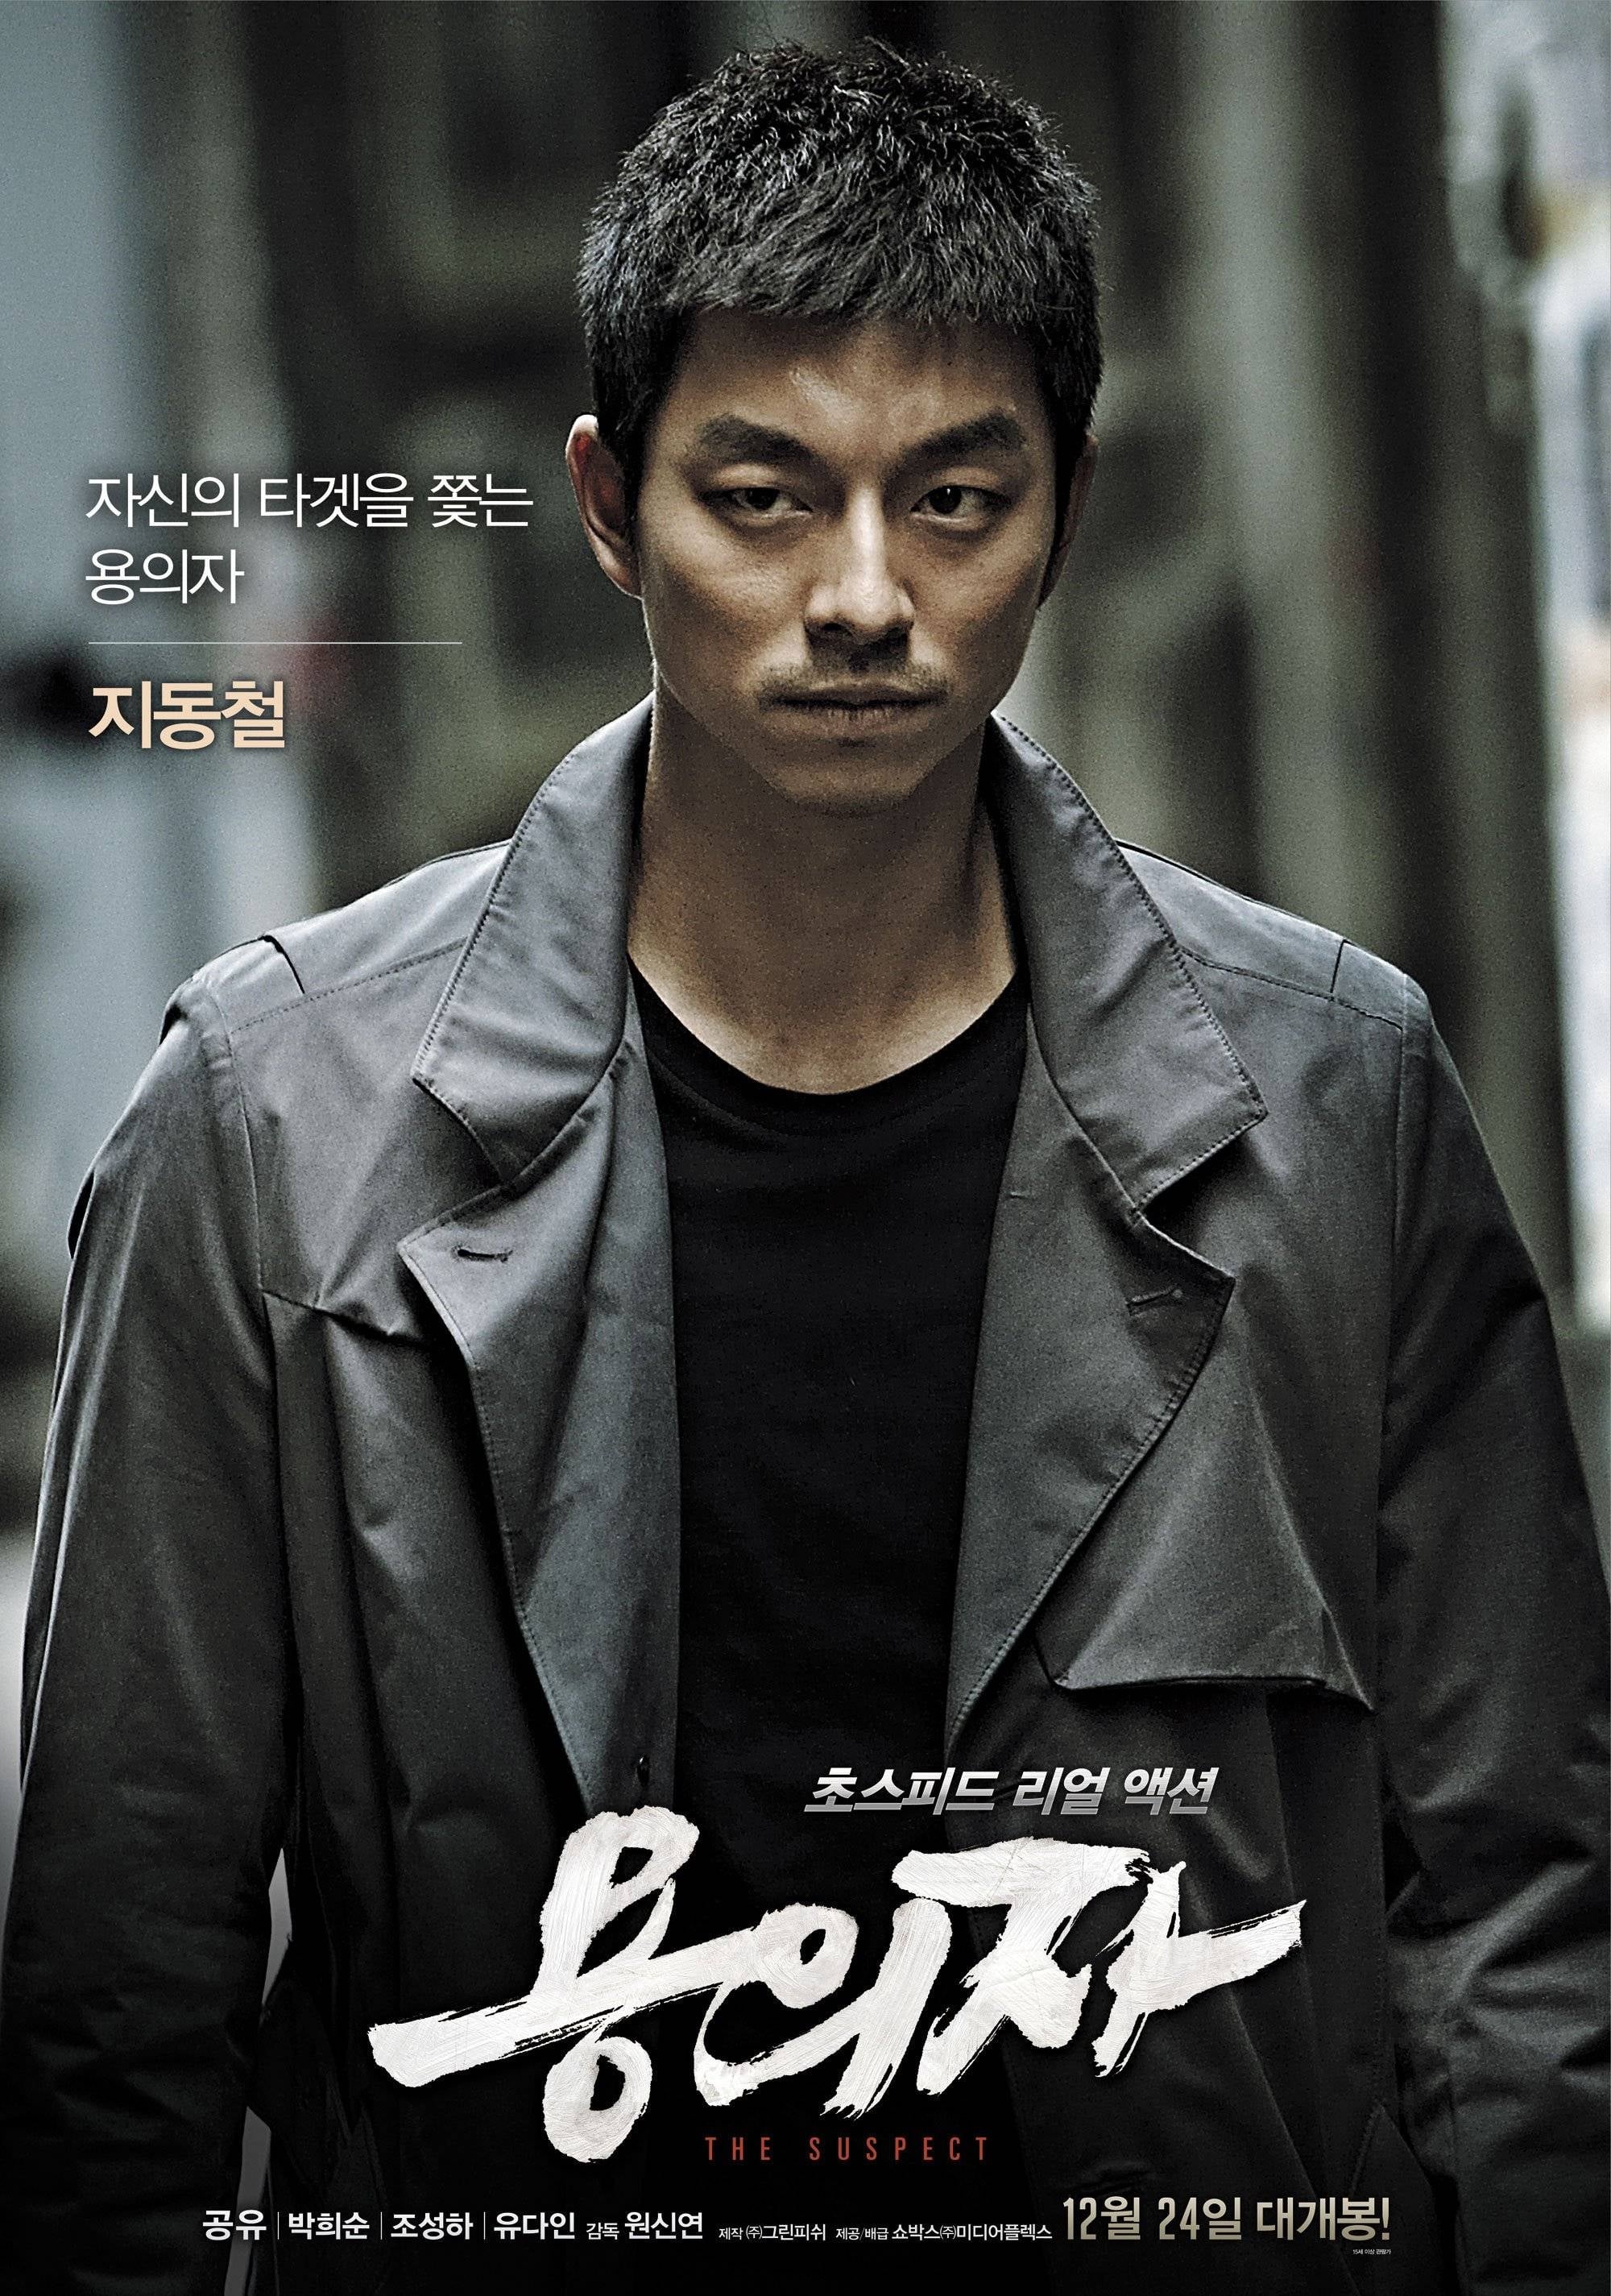 Truy Lùng (The Suspect) [2013]